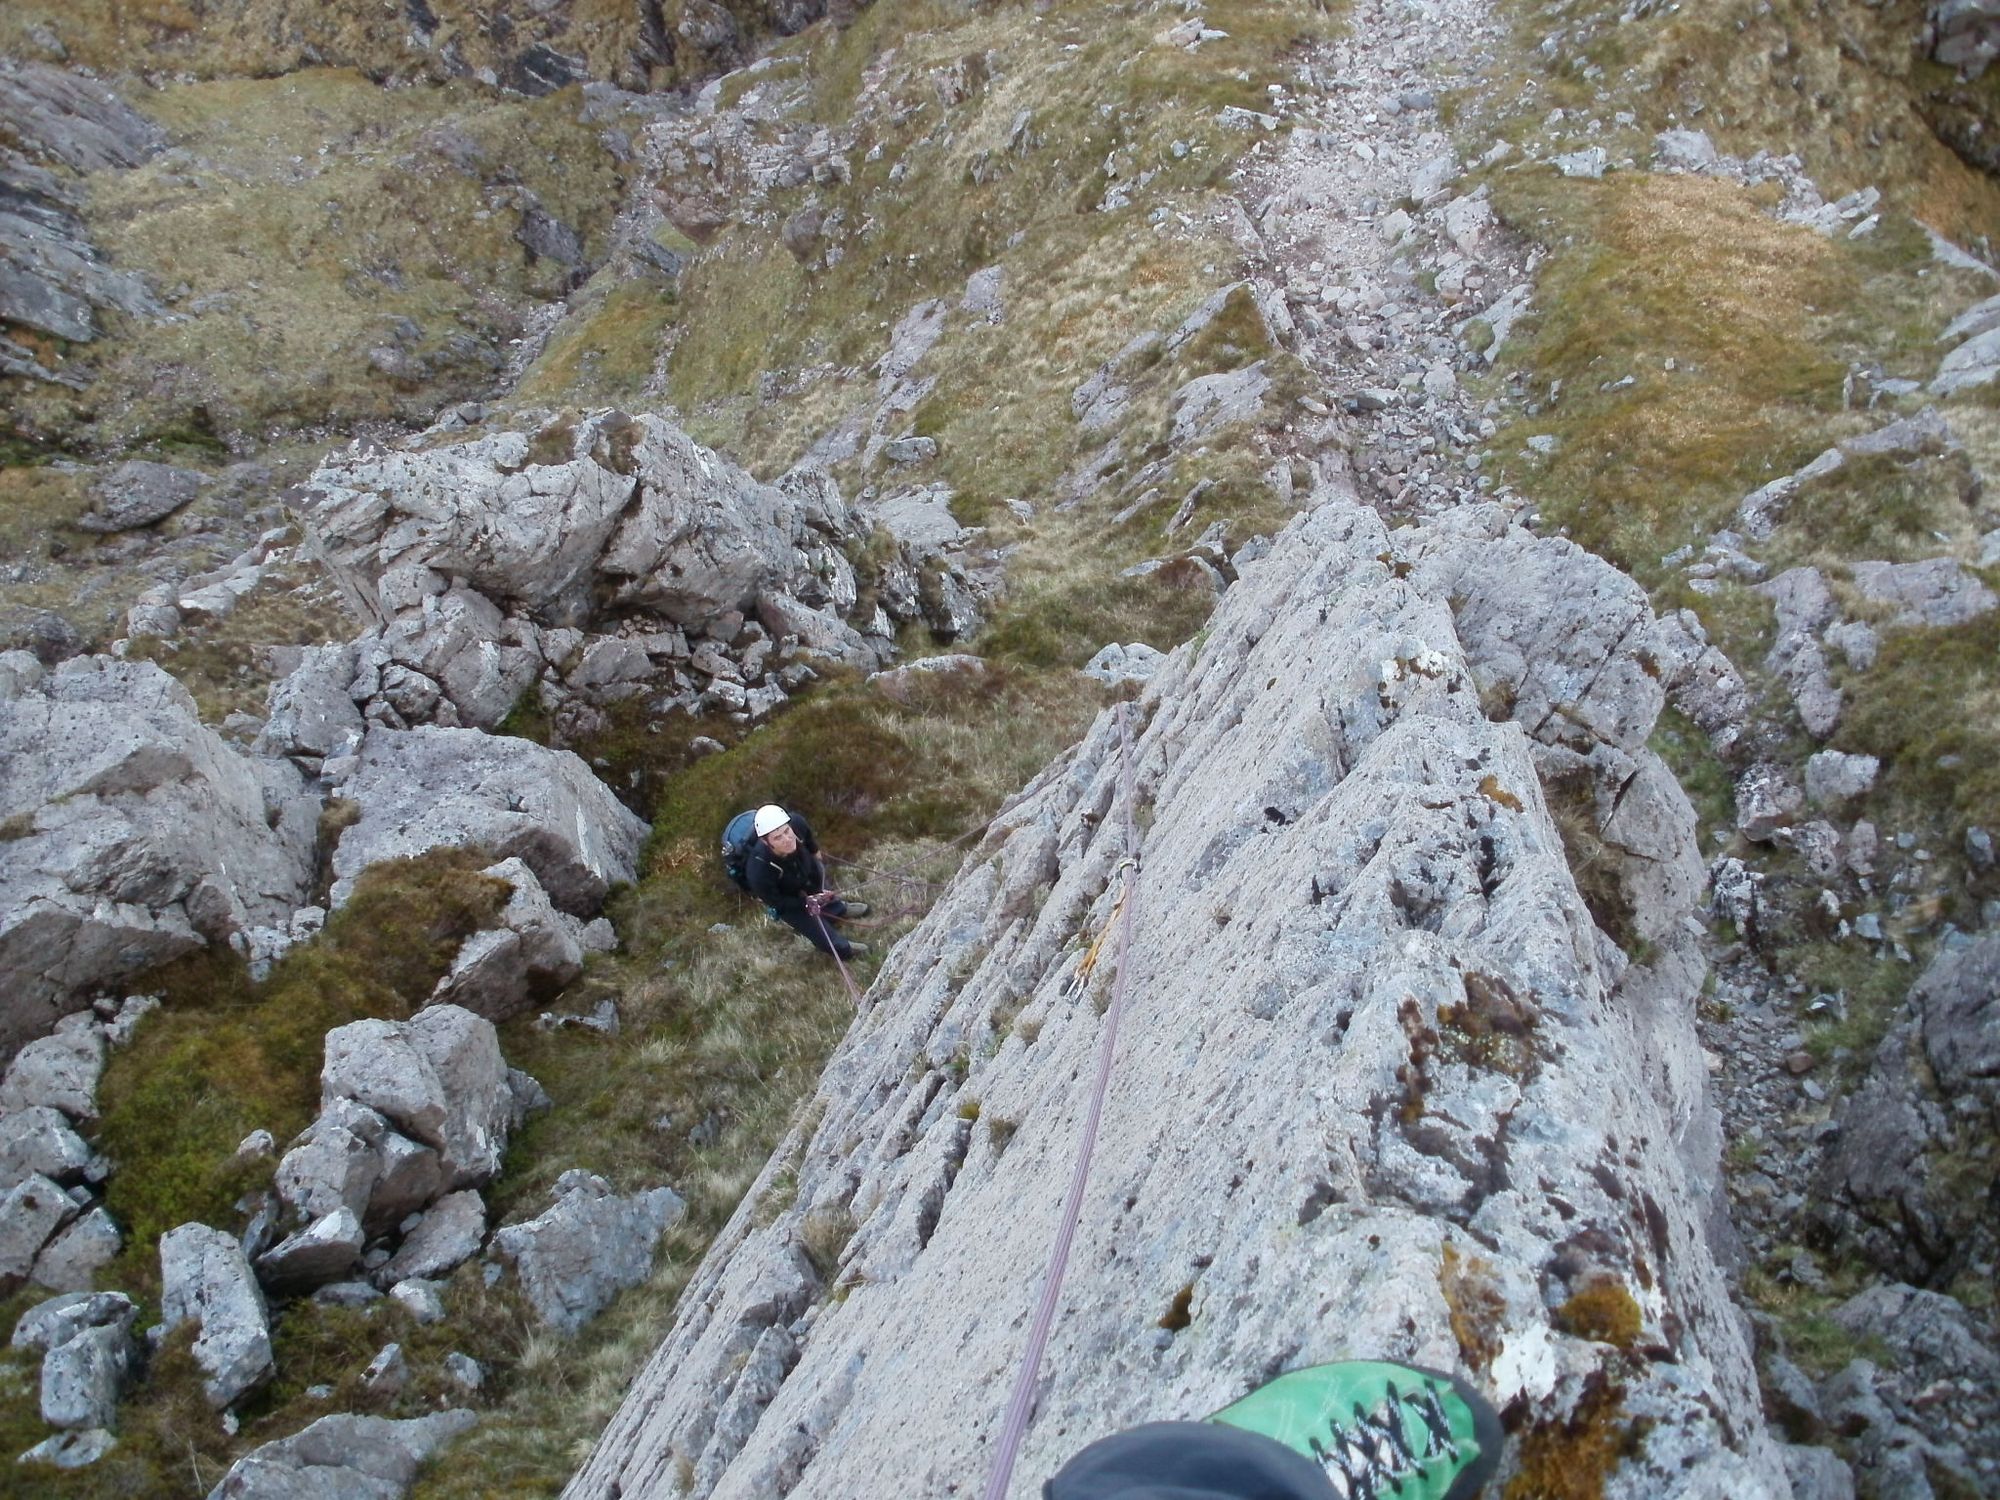 On the second ascent of Shrike Ridge. I made the first ascent in September 2009 solo.